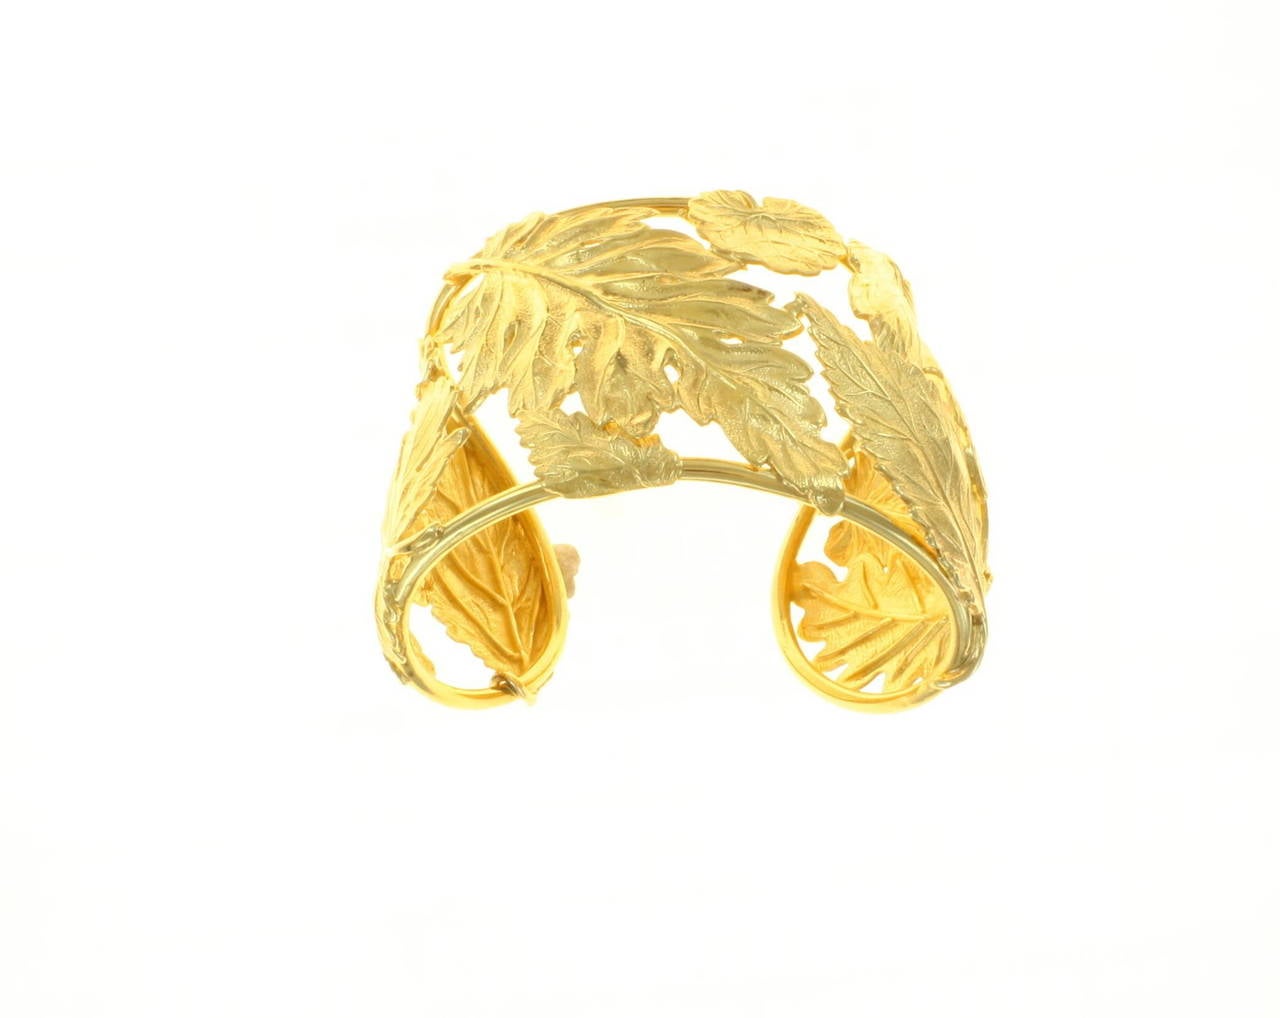 Delicate leaf motif cuff.
Sterling silver 24 carat 5 micron gold plated.